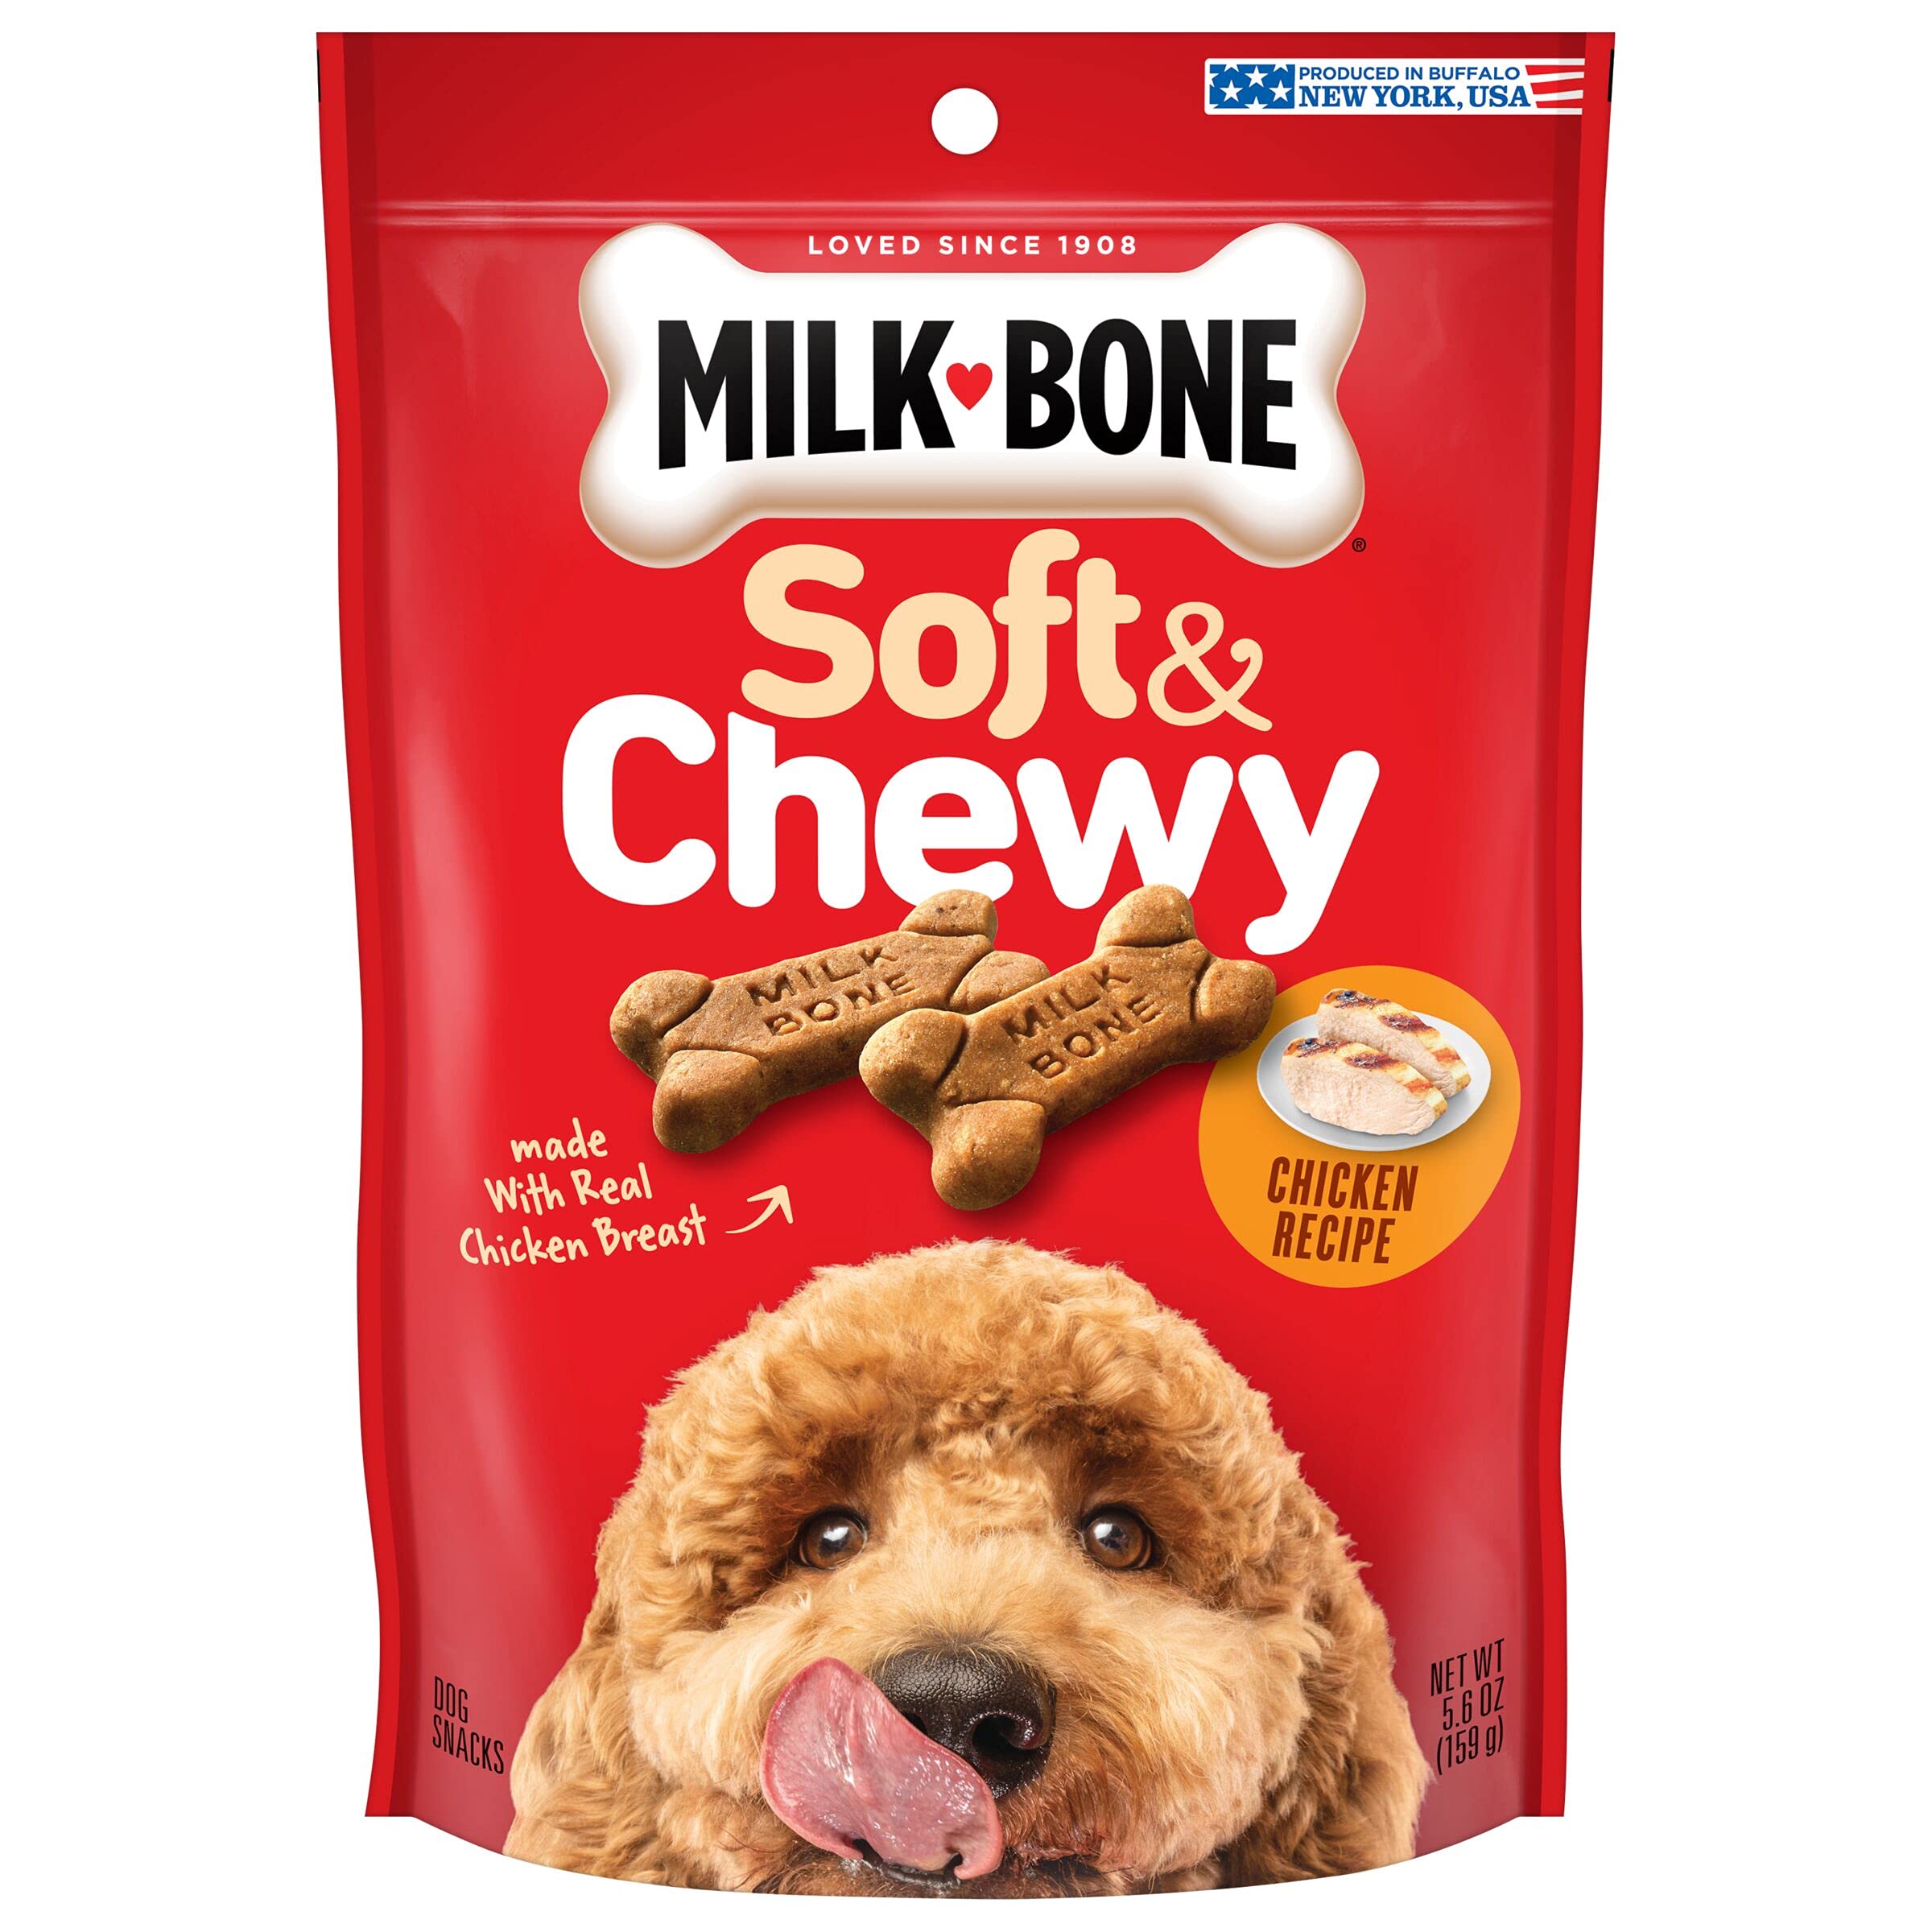 Milk Bone Soft and Chewy Treats Chicken Recipe Dog Treats, 5.6 Ounce Pouches (Pack of 10) [Subscribe & Save] $27.92 @ Amazon